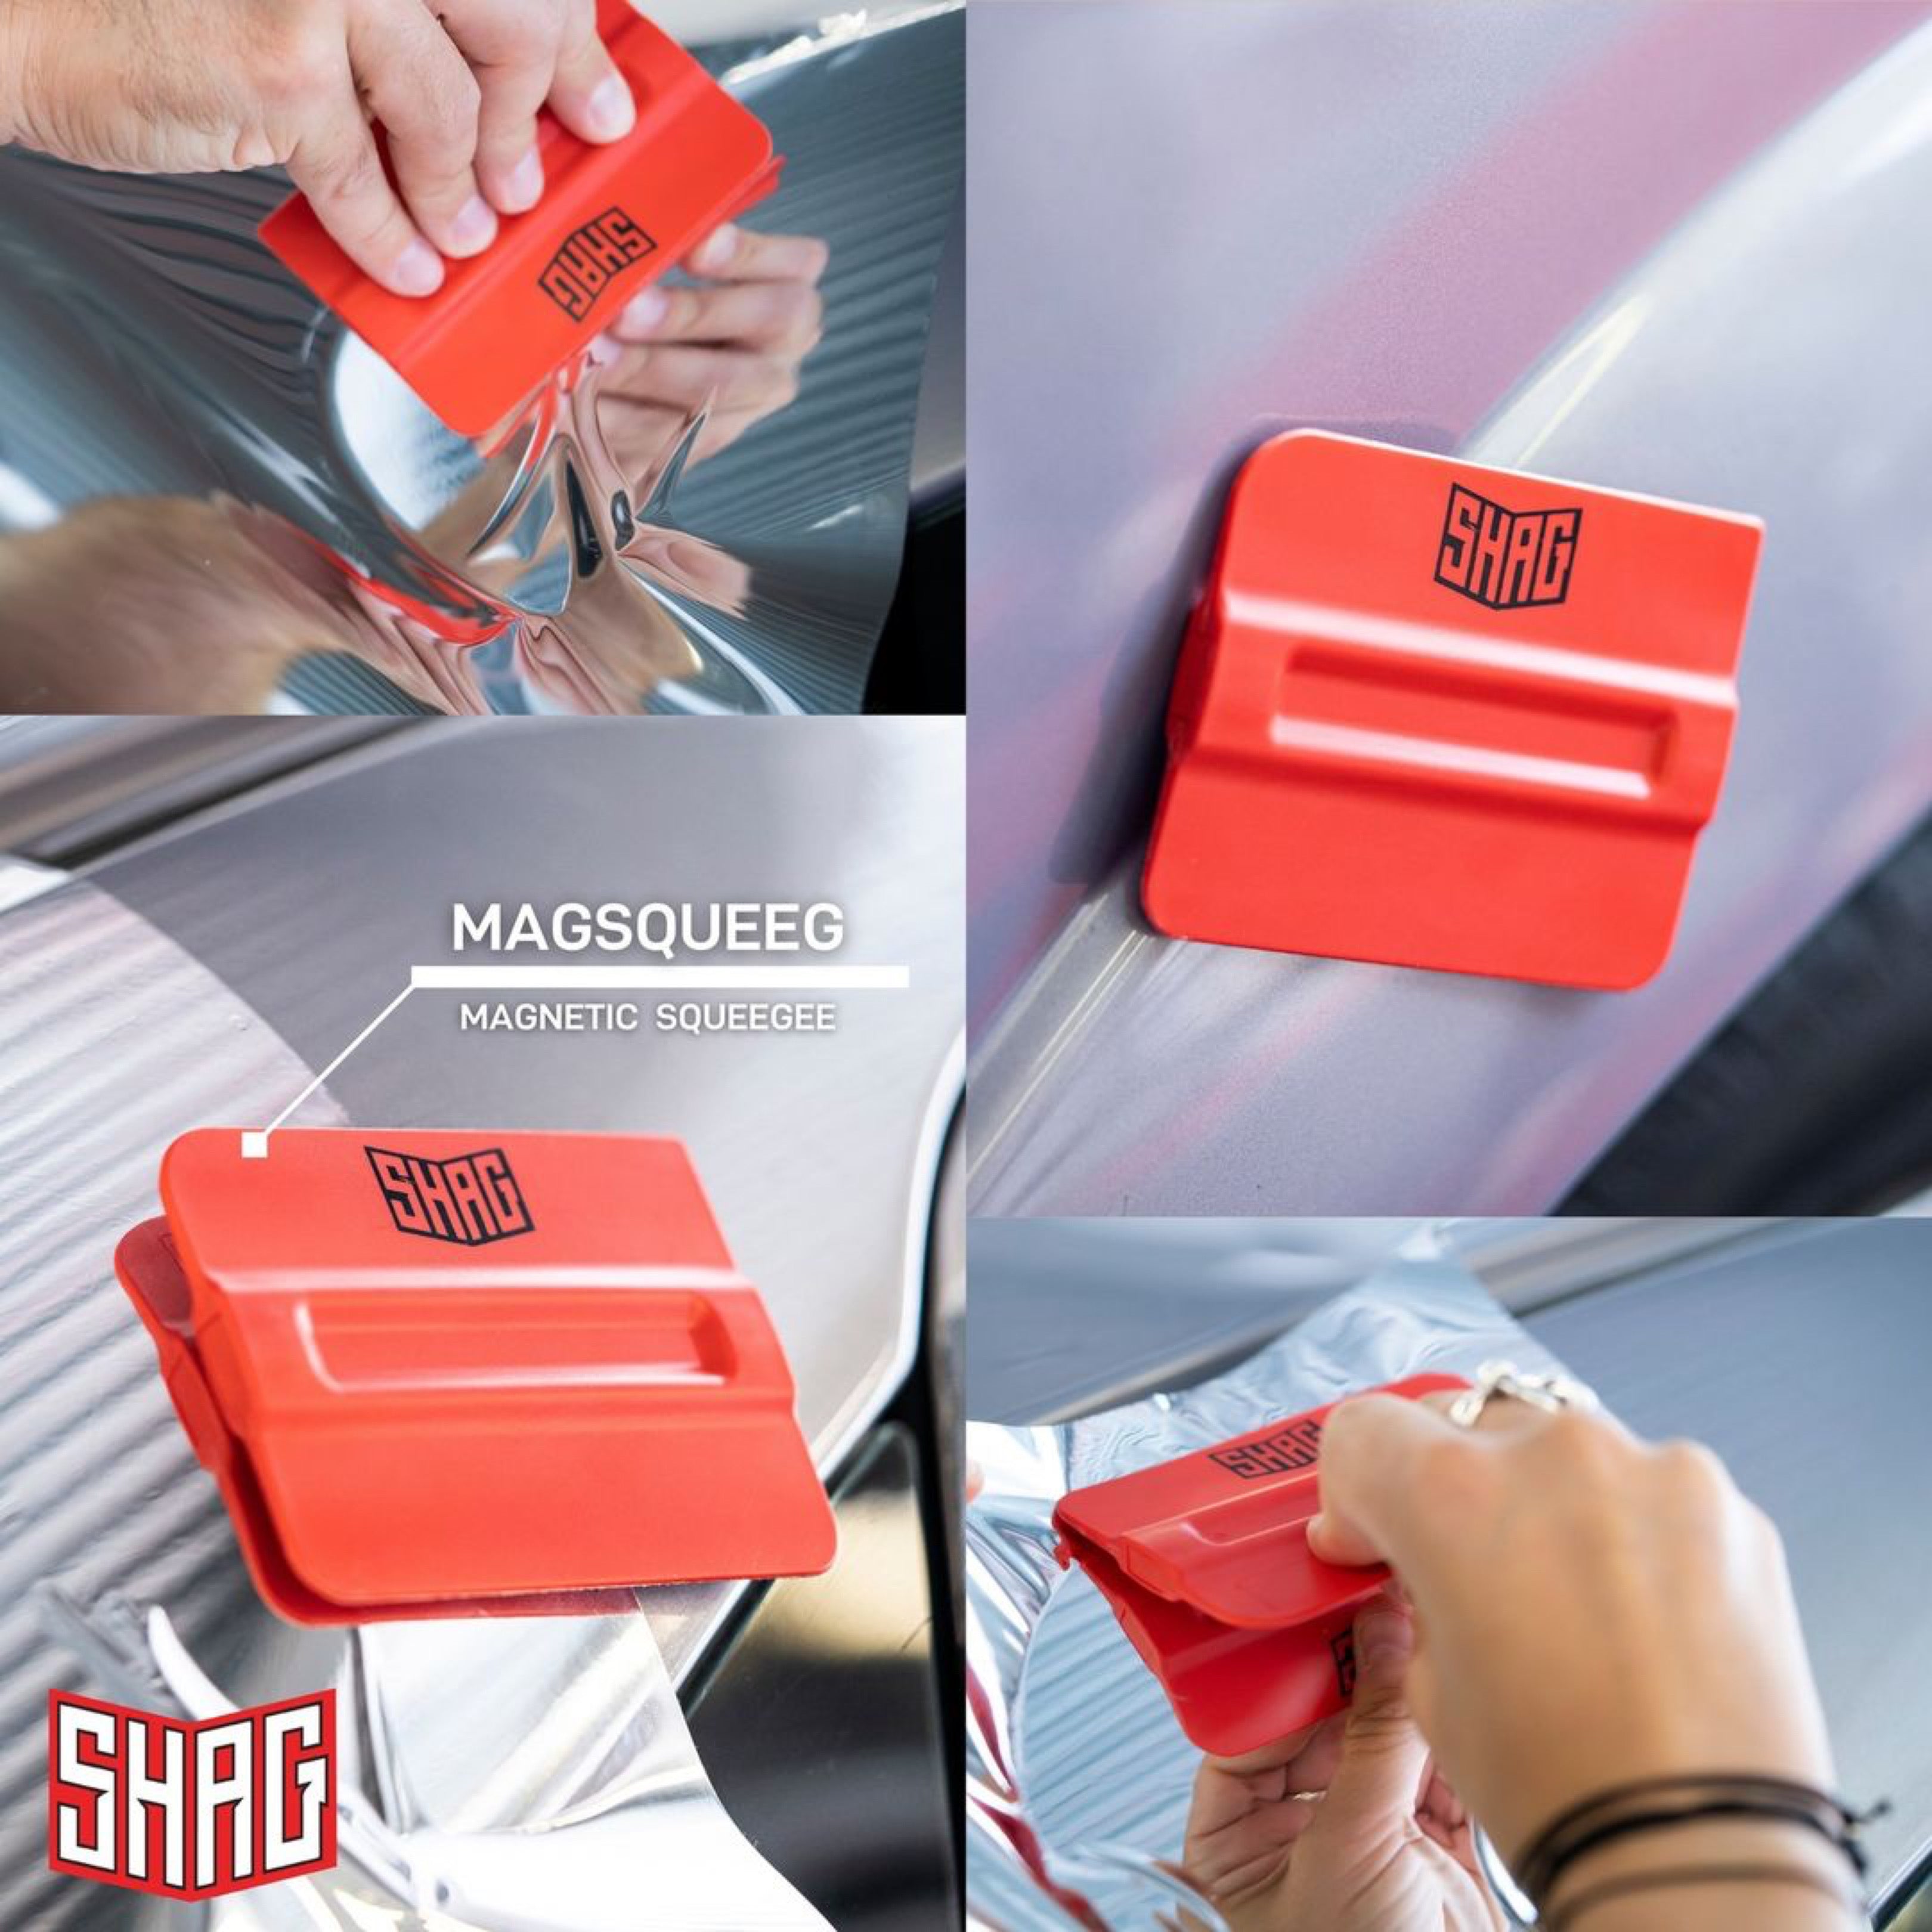 hexis shag magsqueeg magnetic squeegee